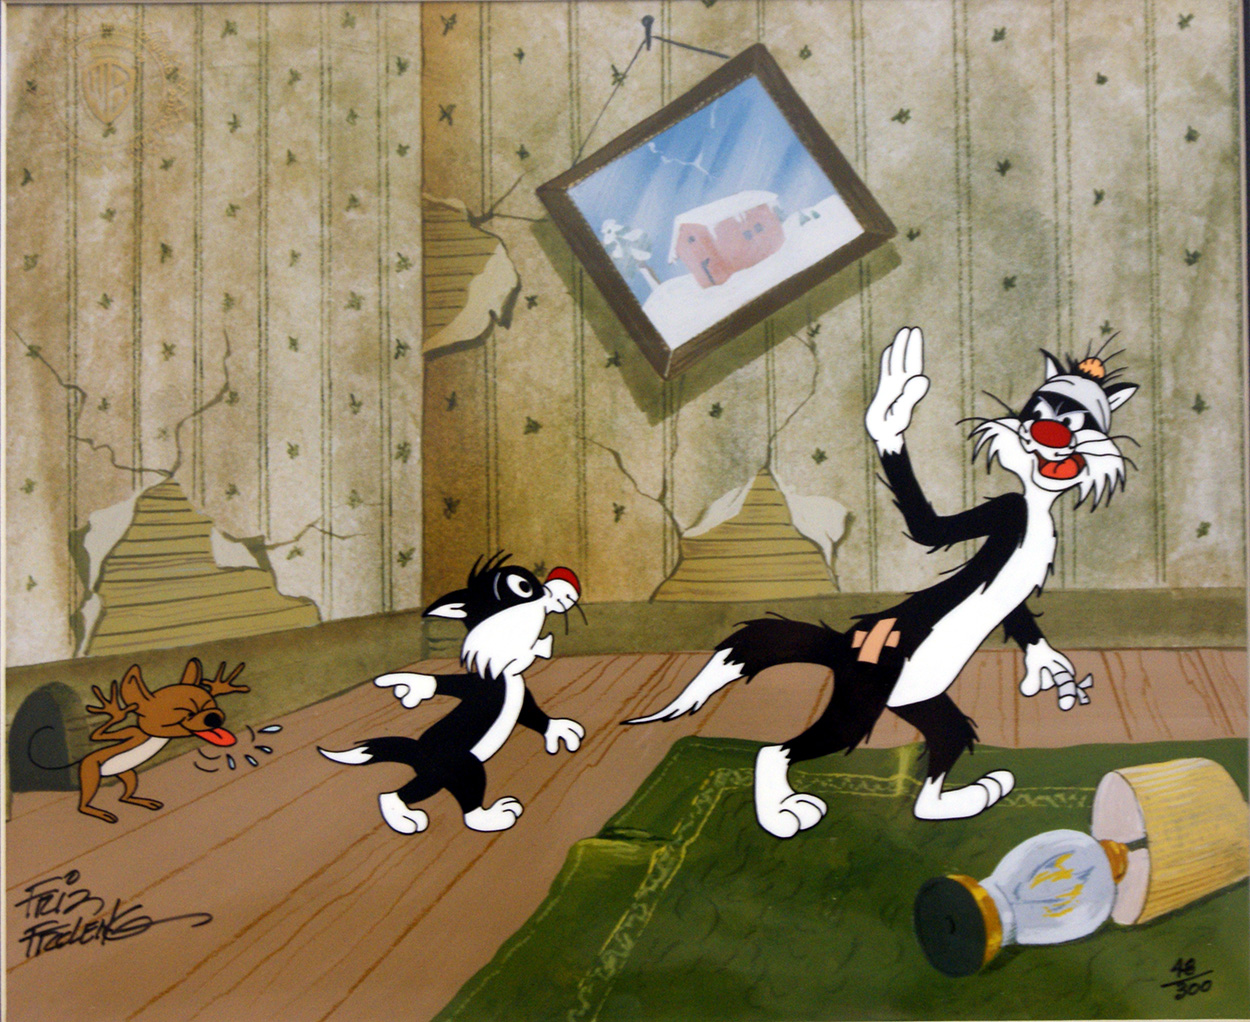 Sylvester Serigraph (Limited Edition Print) (Signed) art by Warner Brothers at The Illustration Art Gallery